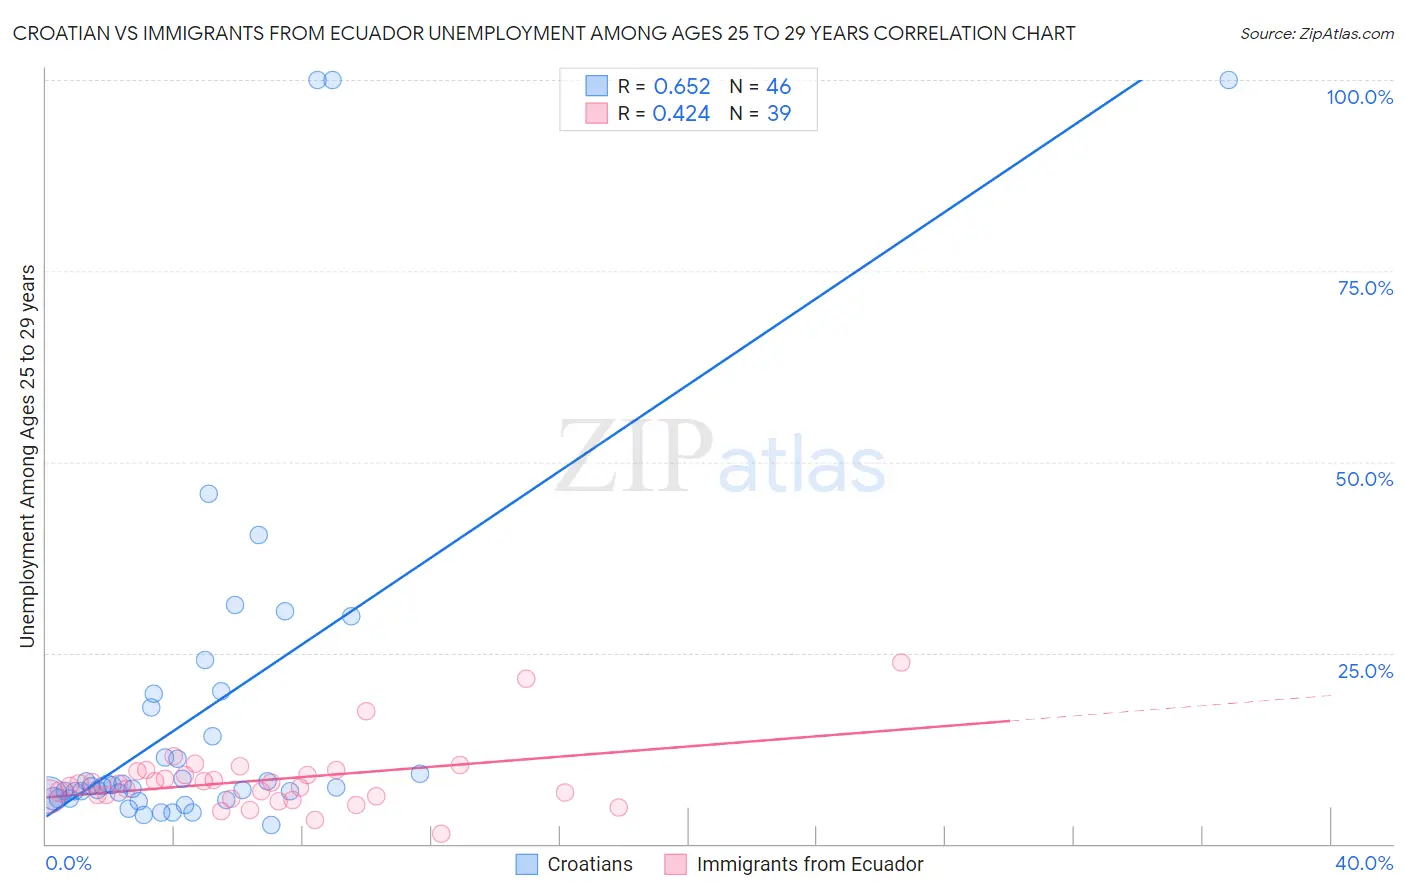 Croatian vs Immigrants from Ecuador Unemployment Among Ages 25 to 29 years